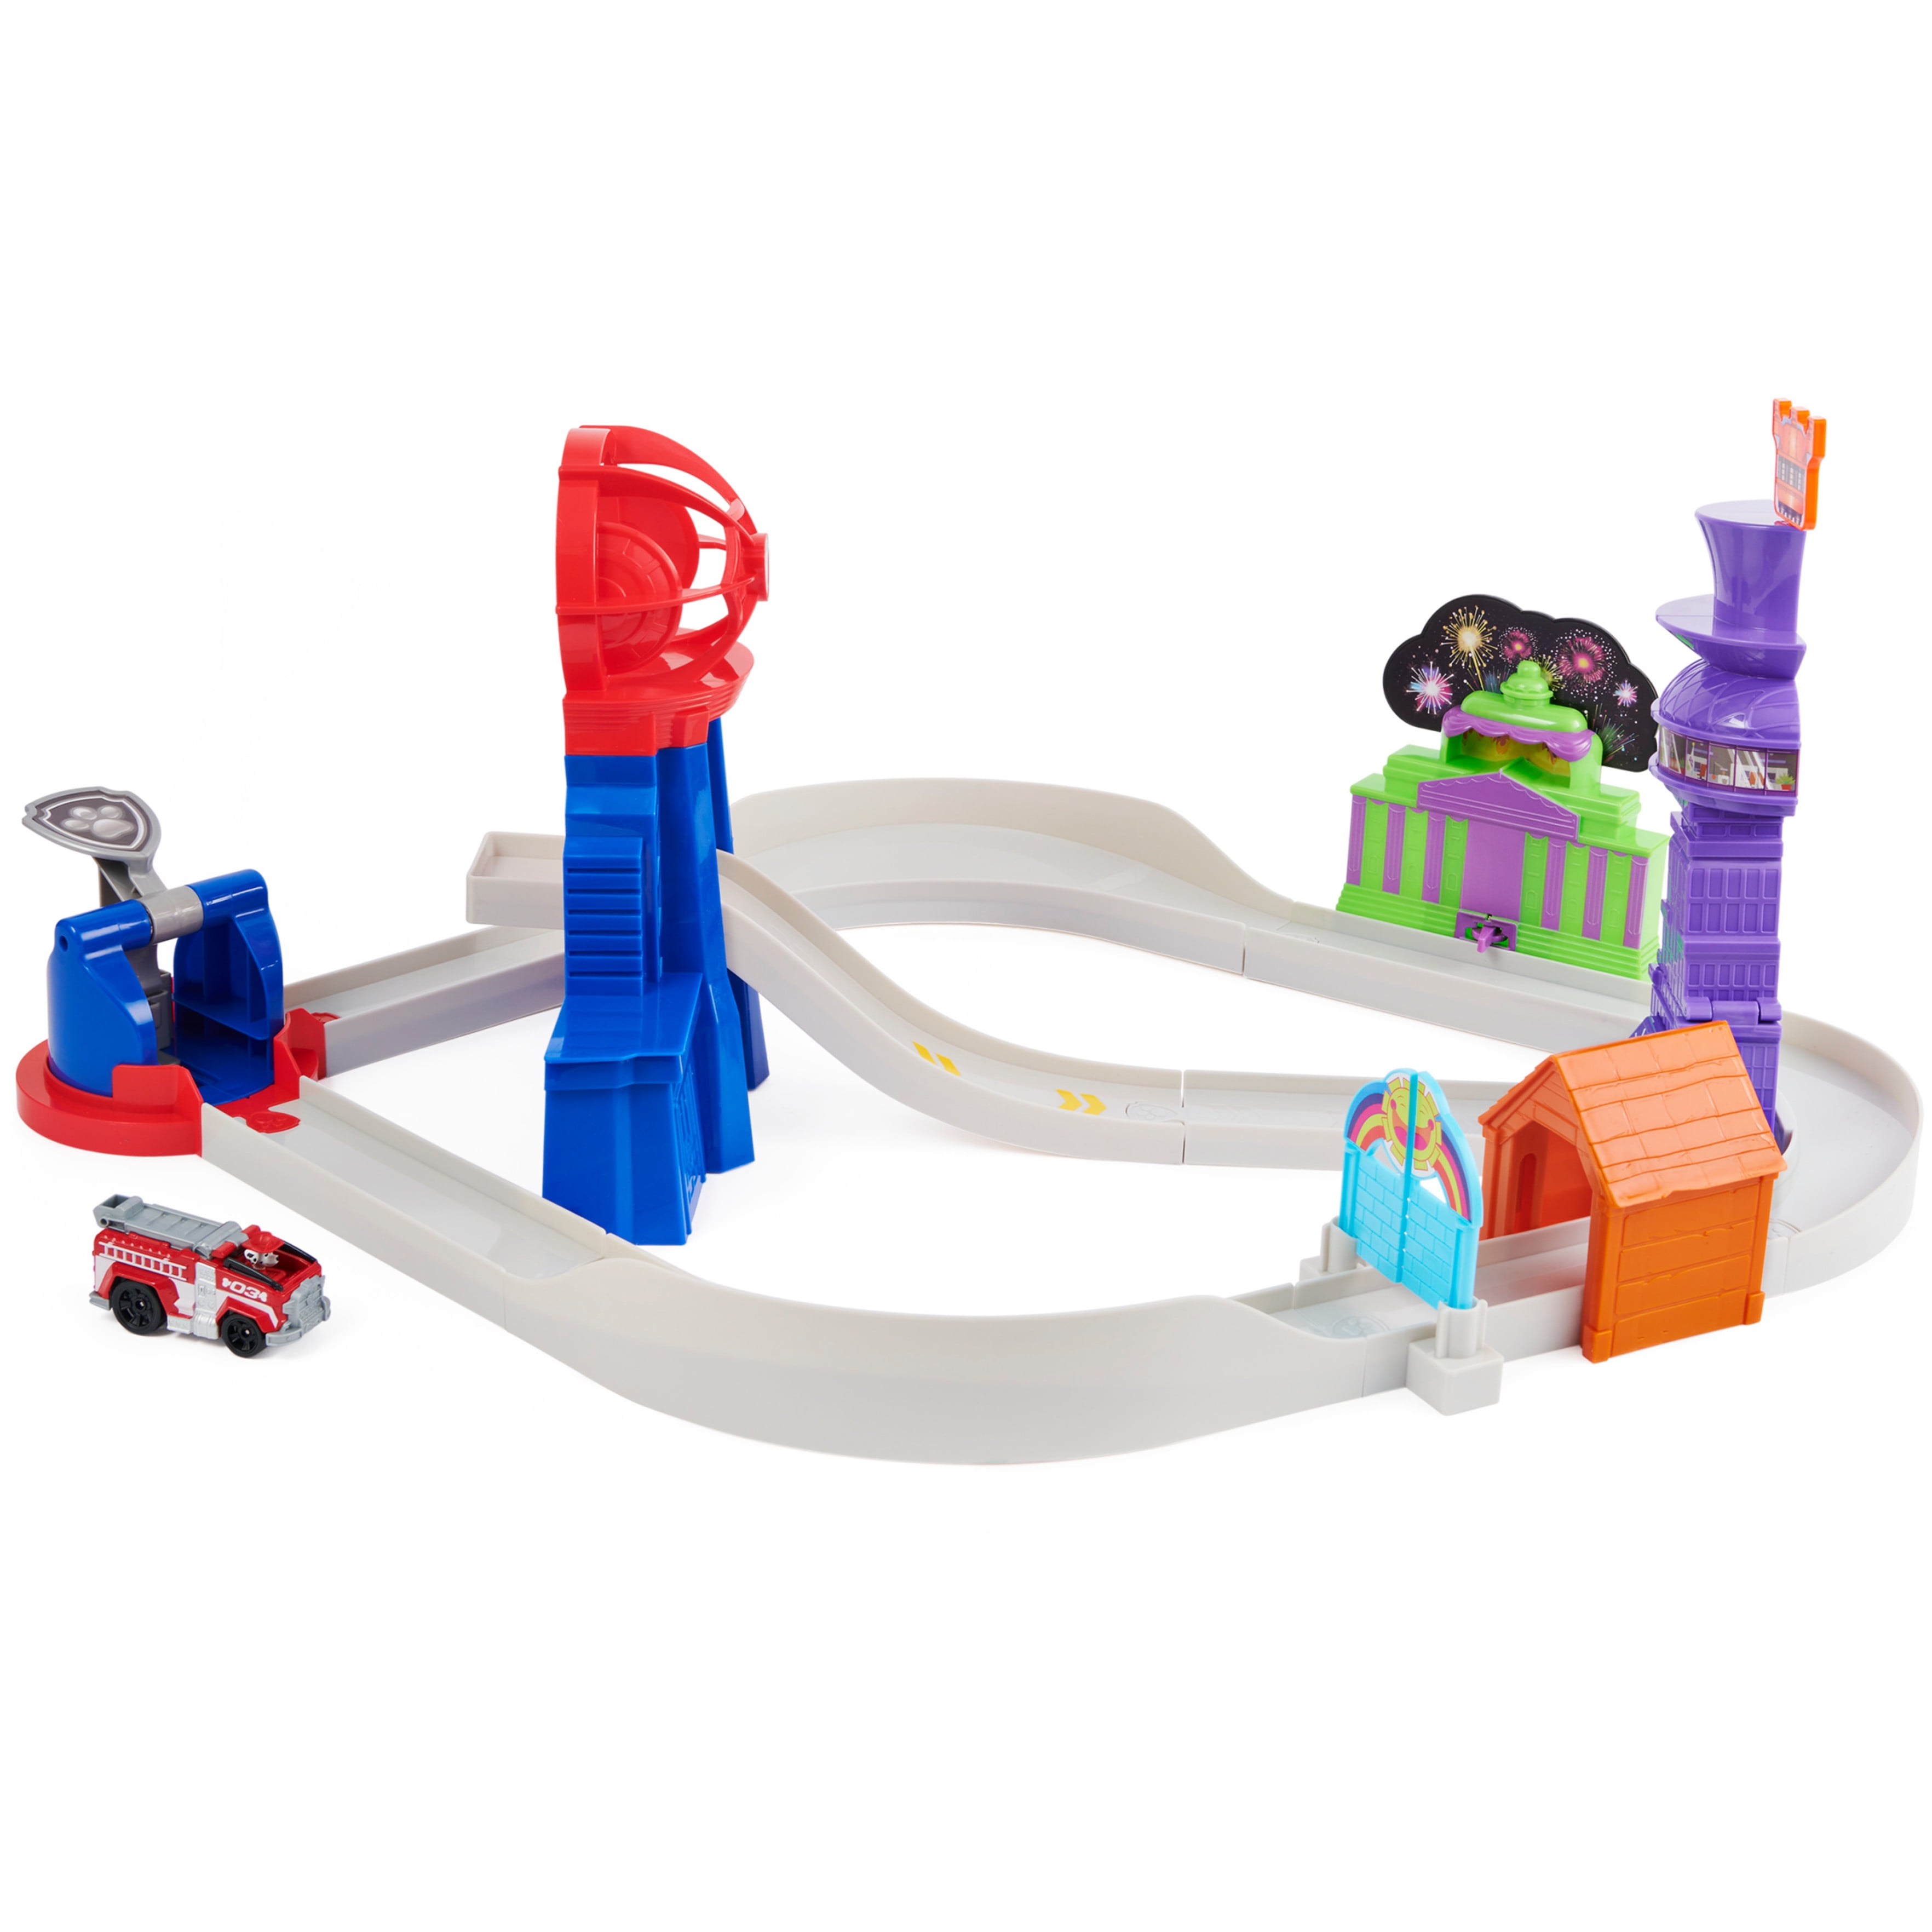 PAW Patrol, True Metal Total City Rescue Vehicle Playset, 1:55 Scale, for Ages 3 and up - 2